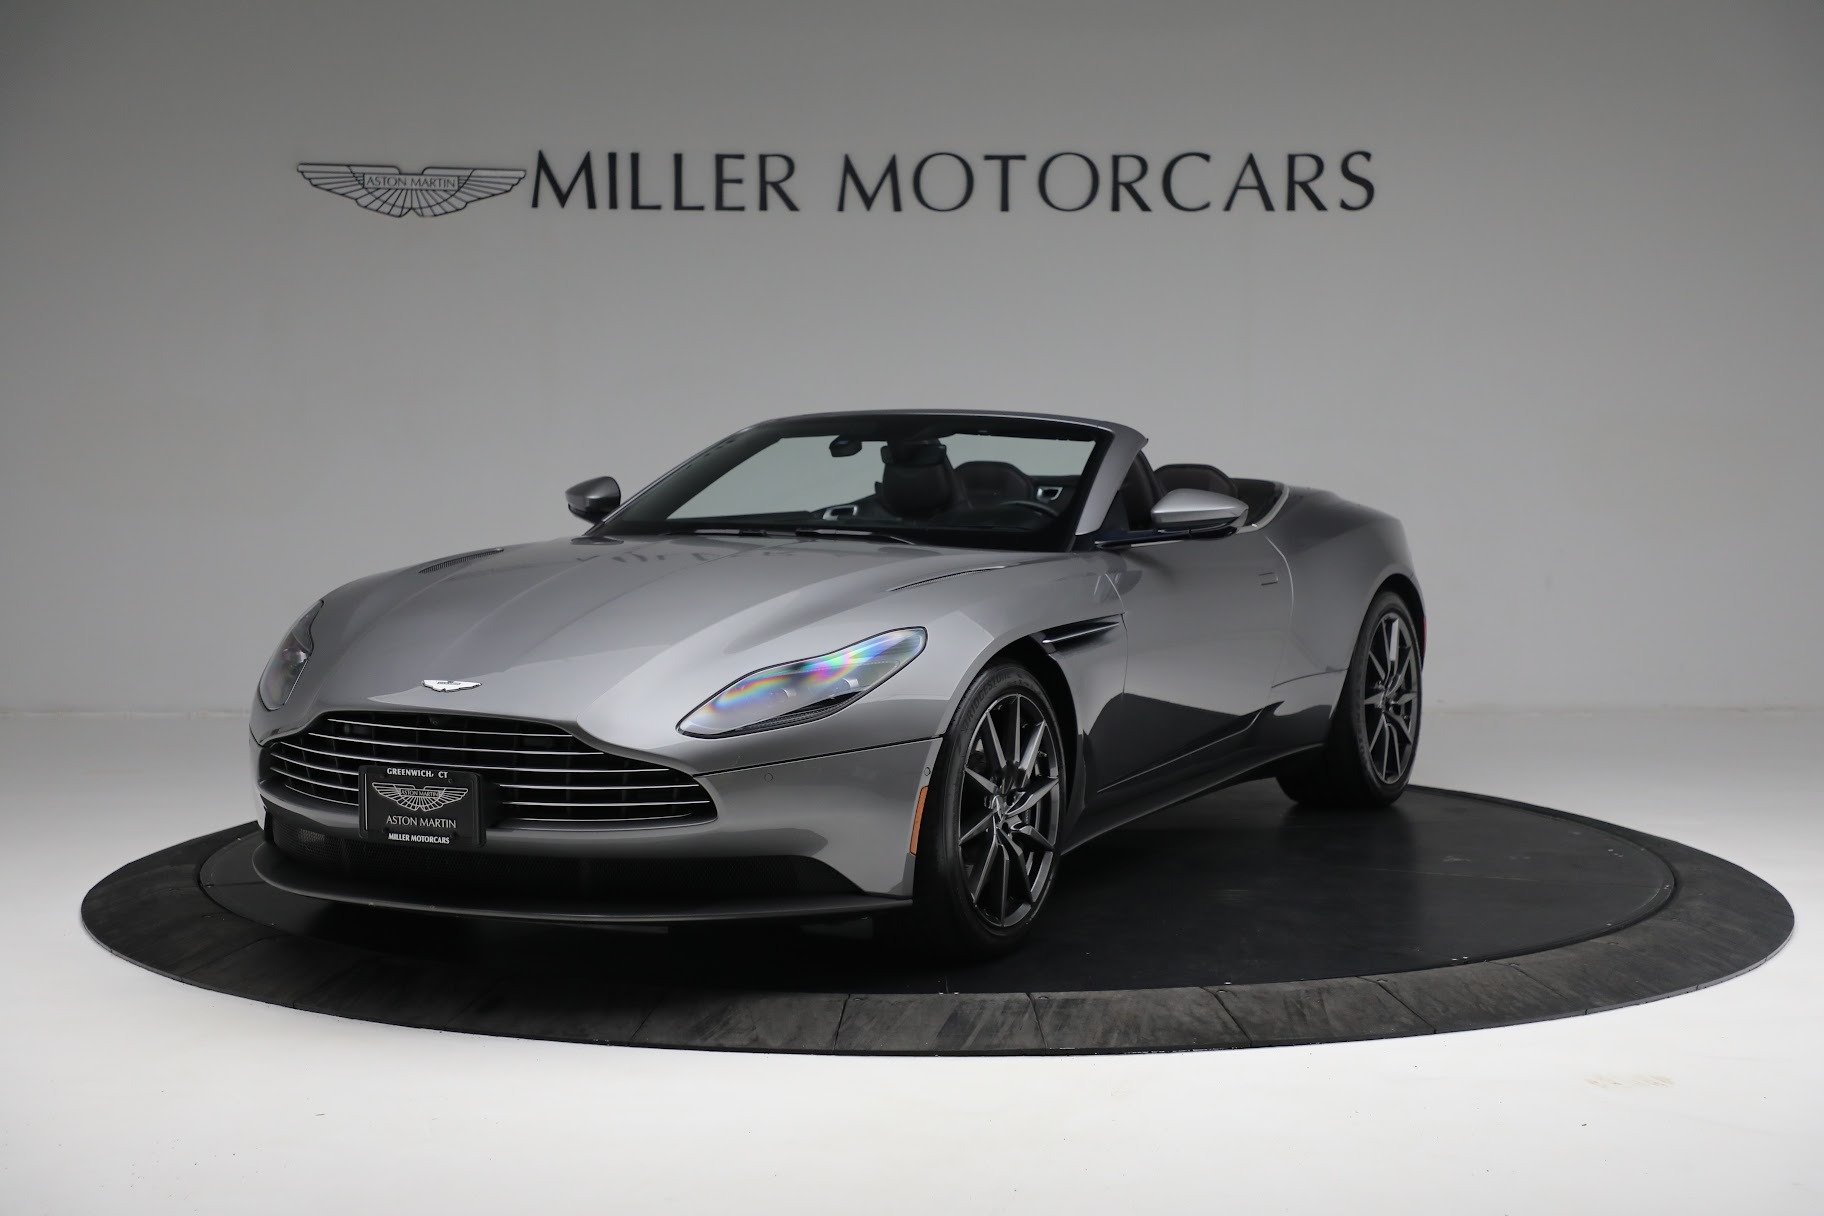 Used 2019 Aston Martin DB11 V8 Convertible for sale Sold at Maserati of Westport in Westport CT 06880 1